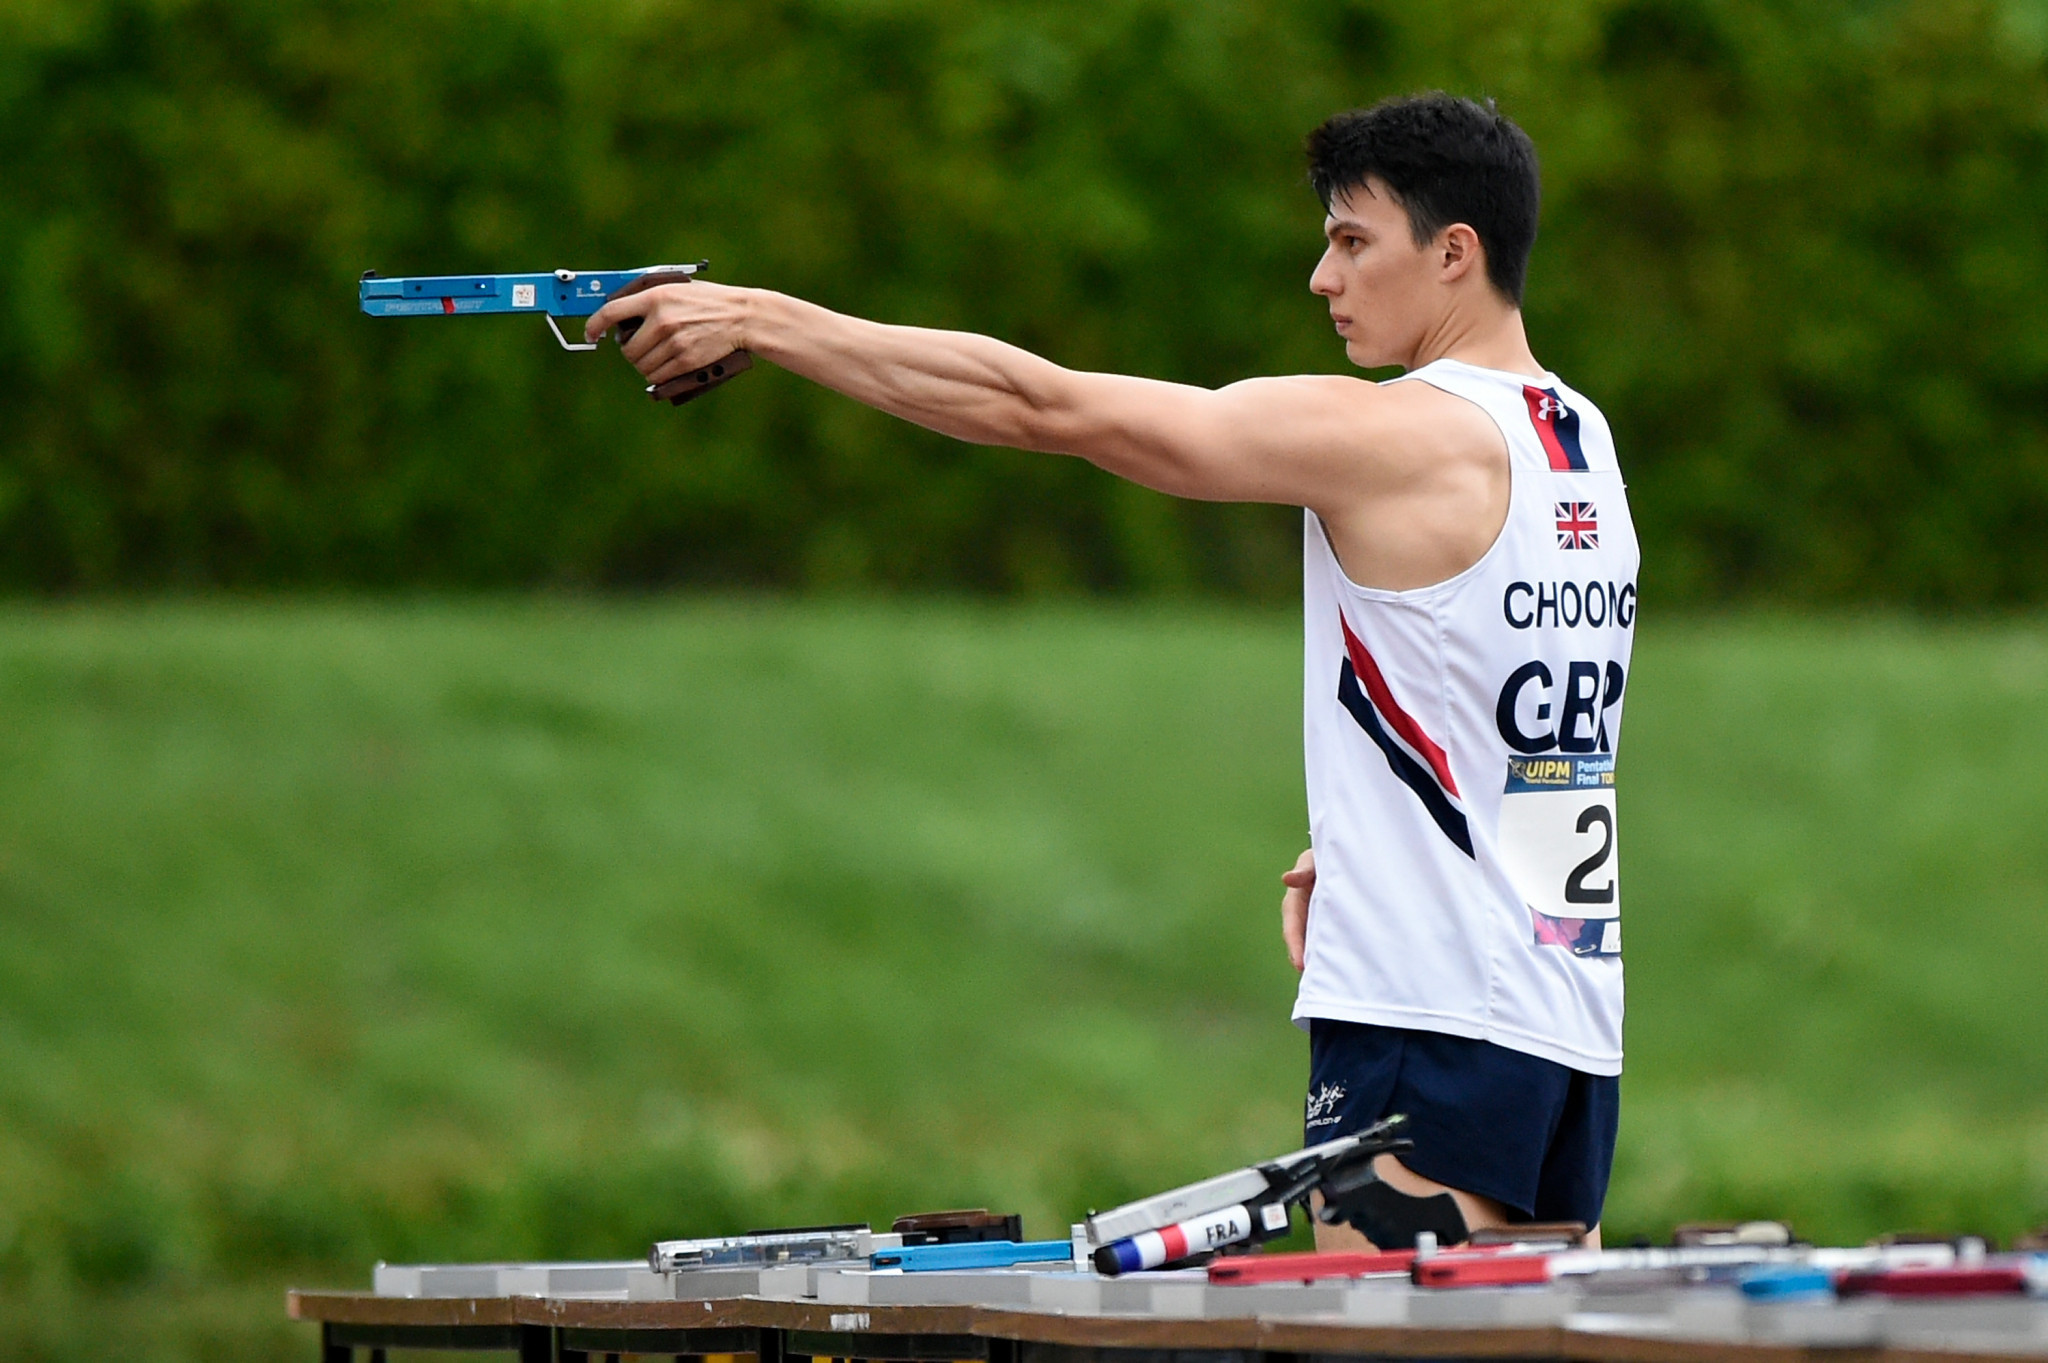 James Cooke and Joe Choong, pictured, impressed in men's qualification for the European Modern Pentathlon Championships ©Getty Images